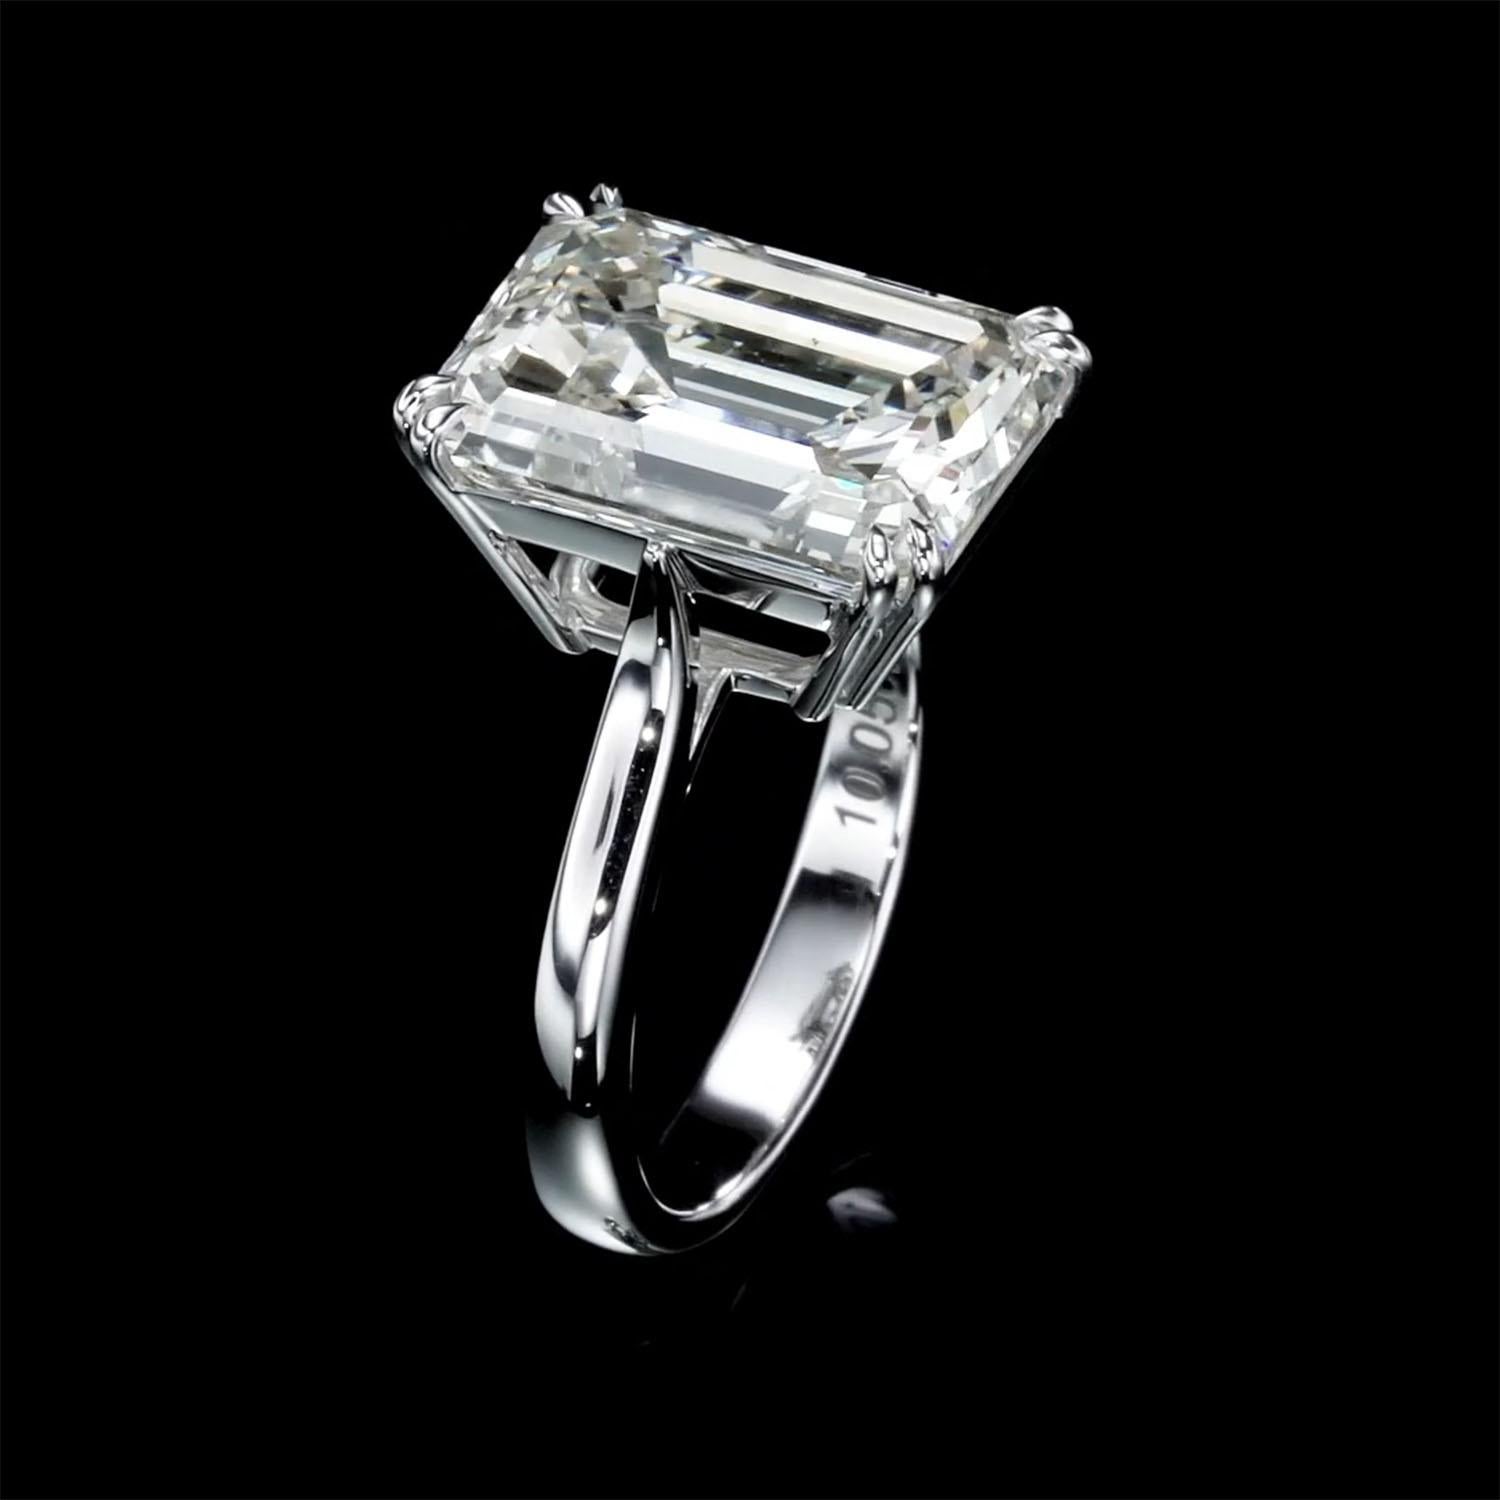 10.05 Carat Natural Diamond Ring Emerald Cut Color L Clarity SI1 For Sale 1